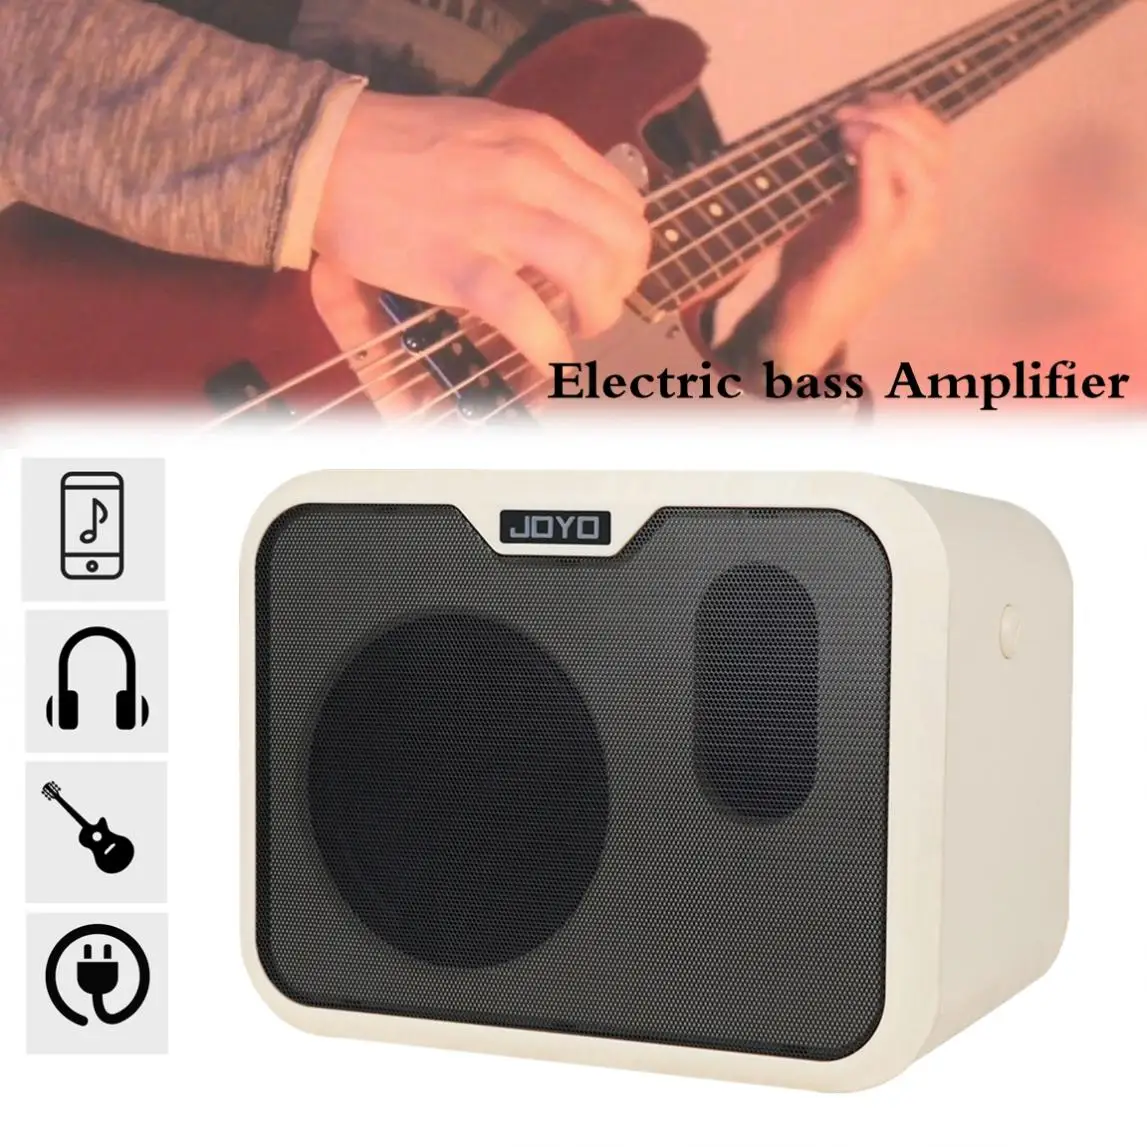 Enlarge 5 Inch Portable Mini Electric Bass Amplifier Speaker 10Watt Amp Normal / Drive Dual Channels with Power Adapter